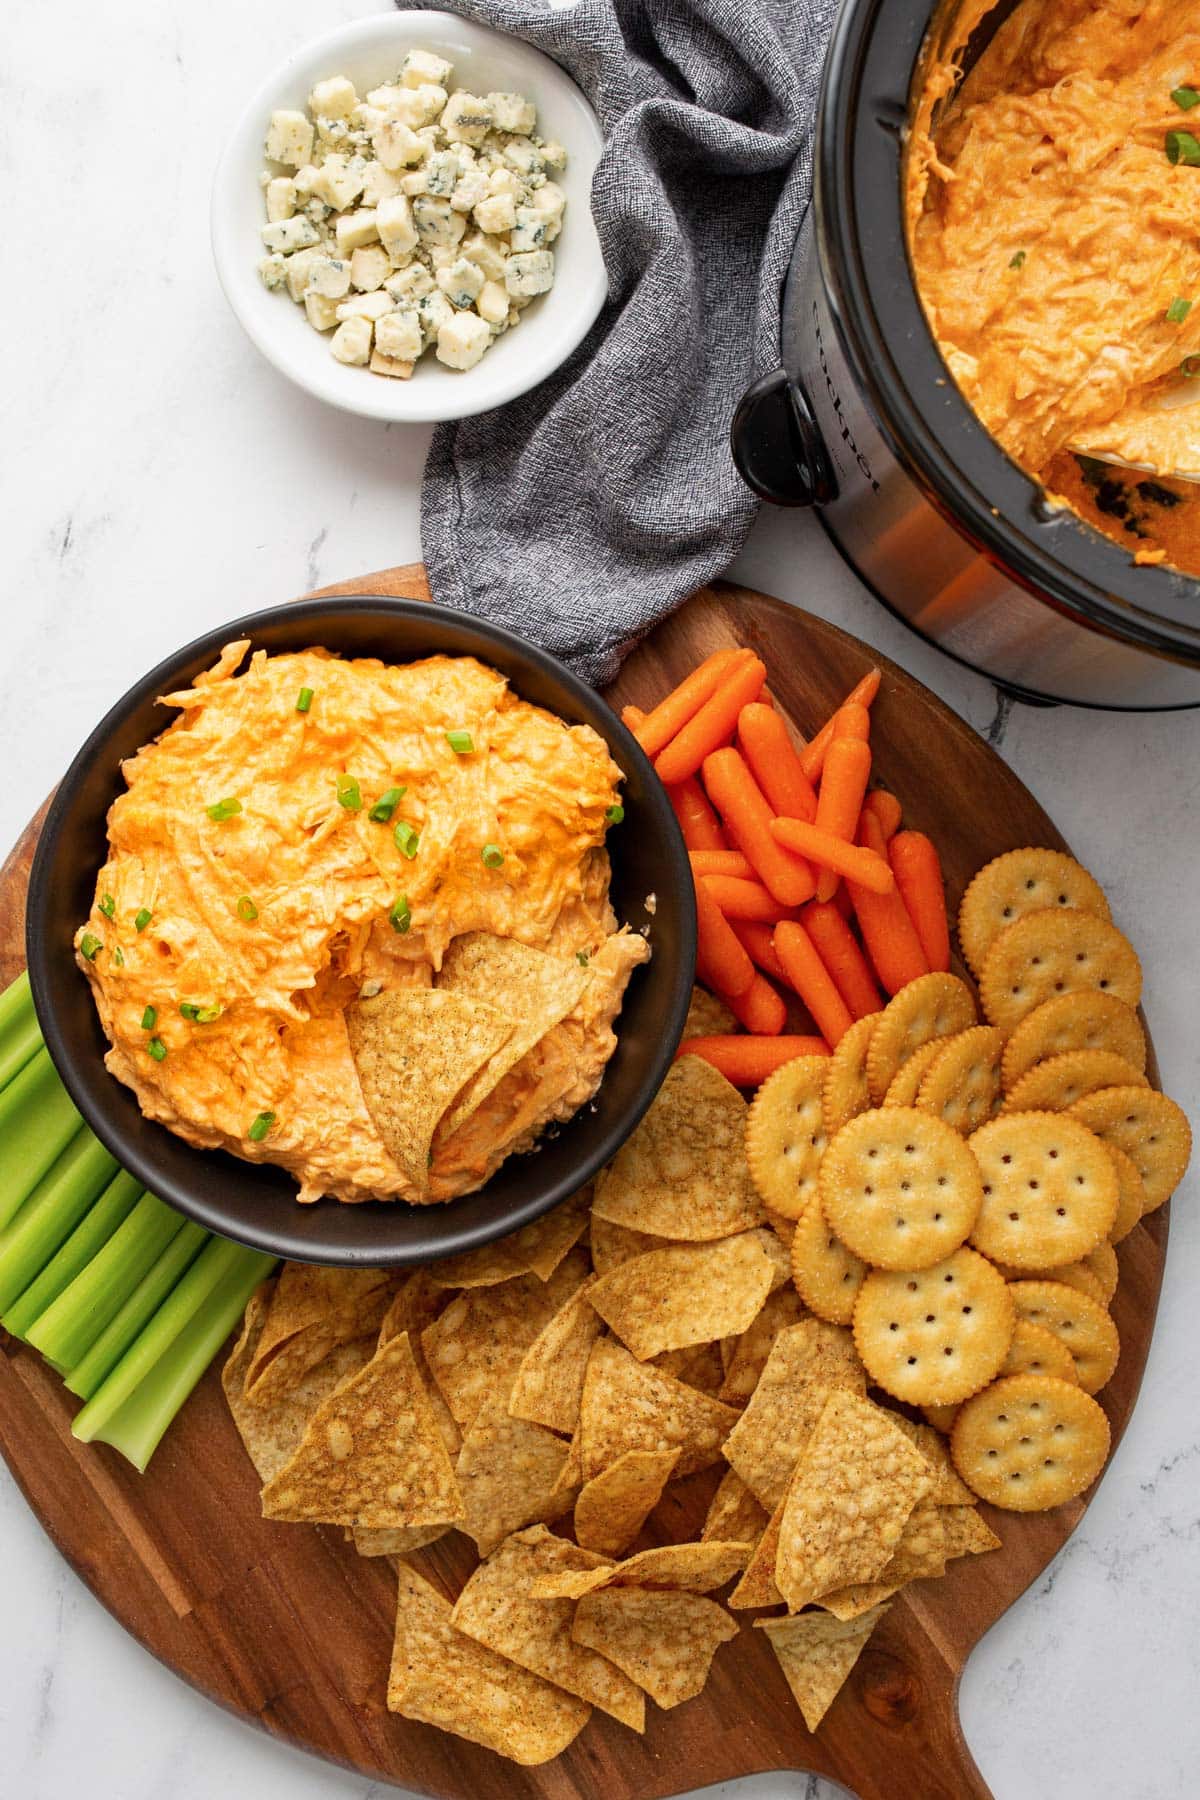 Slow cooker buffalo chicken served in a crock pot and black bowl surrounded by tortilla chips, crackers, celery sticks, baby carrots and blue cheese crumbles.